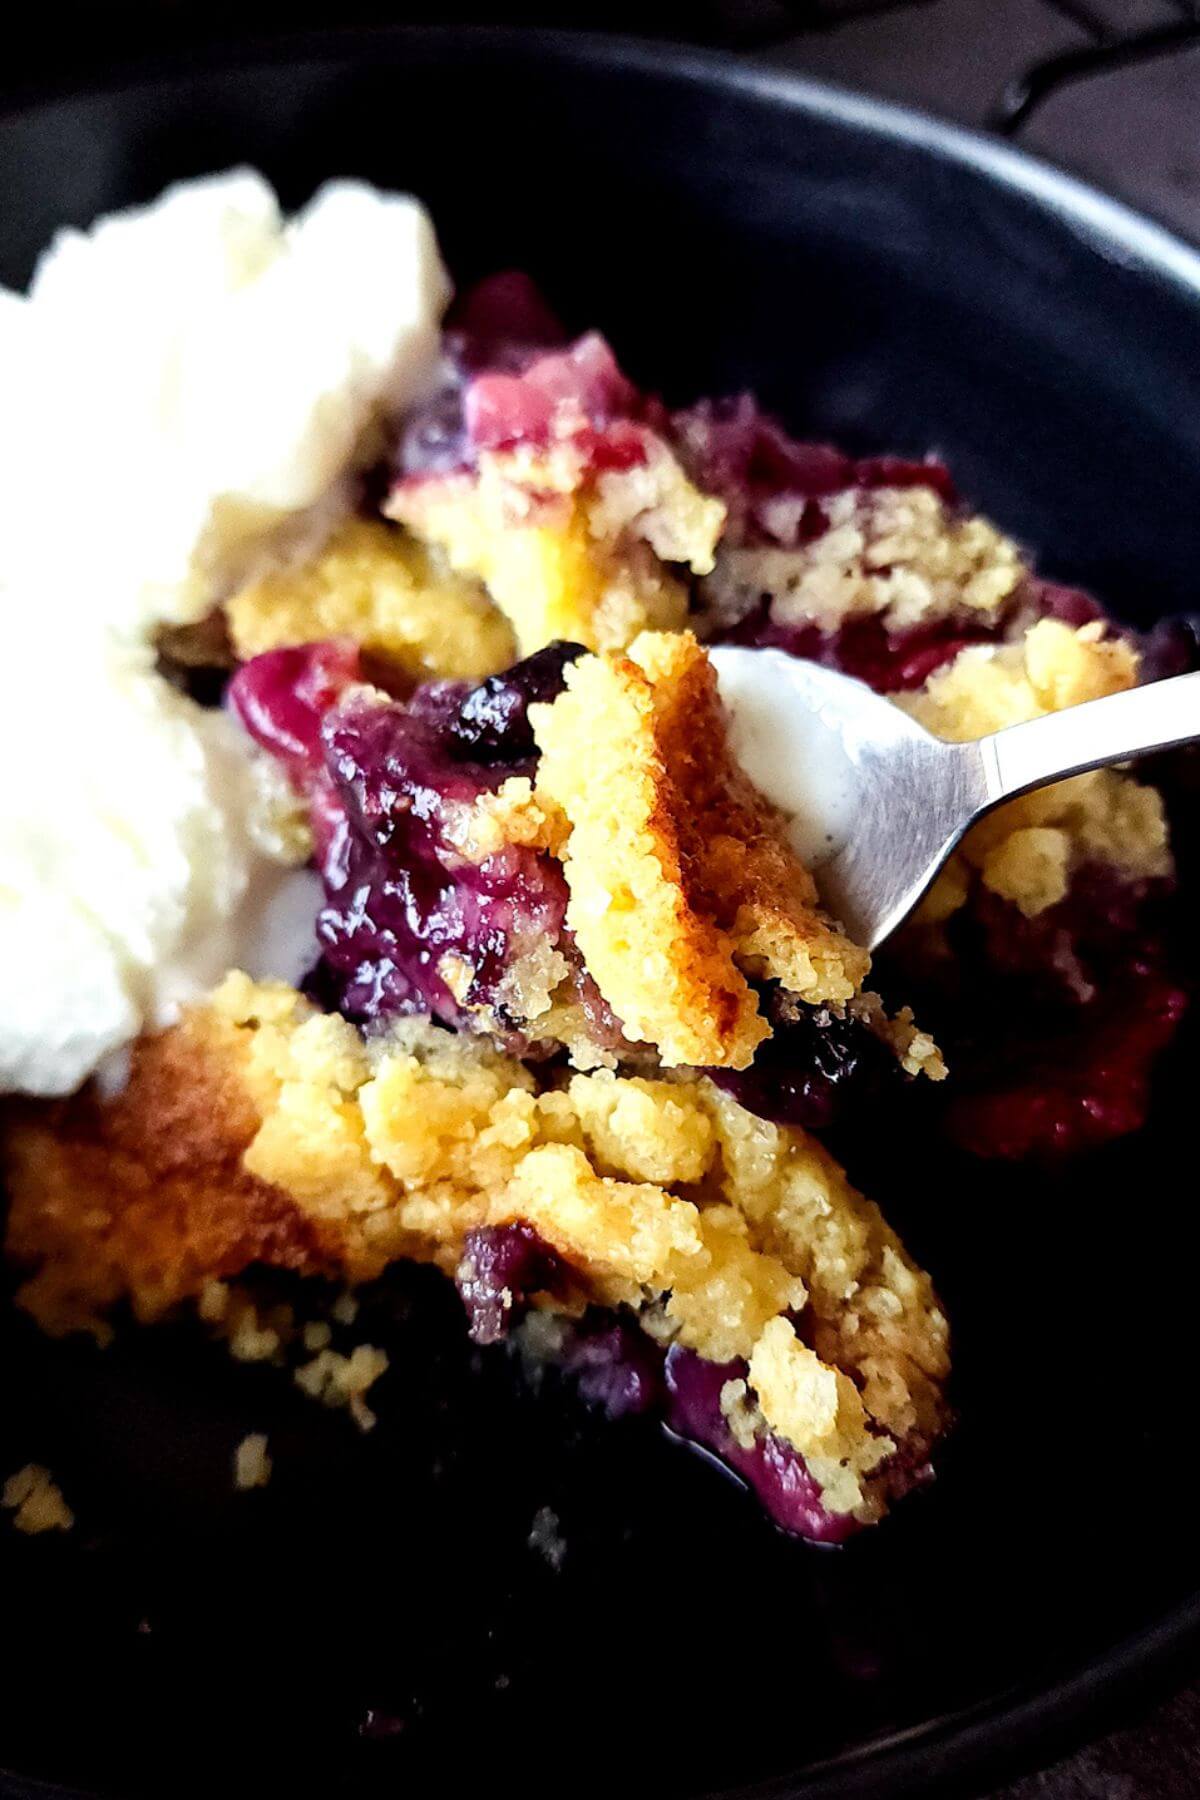 A spoonful of cobbler lifted over a bowl of mixed berries cobbler and vanilla ice cream.